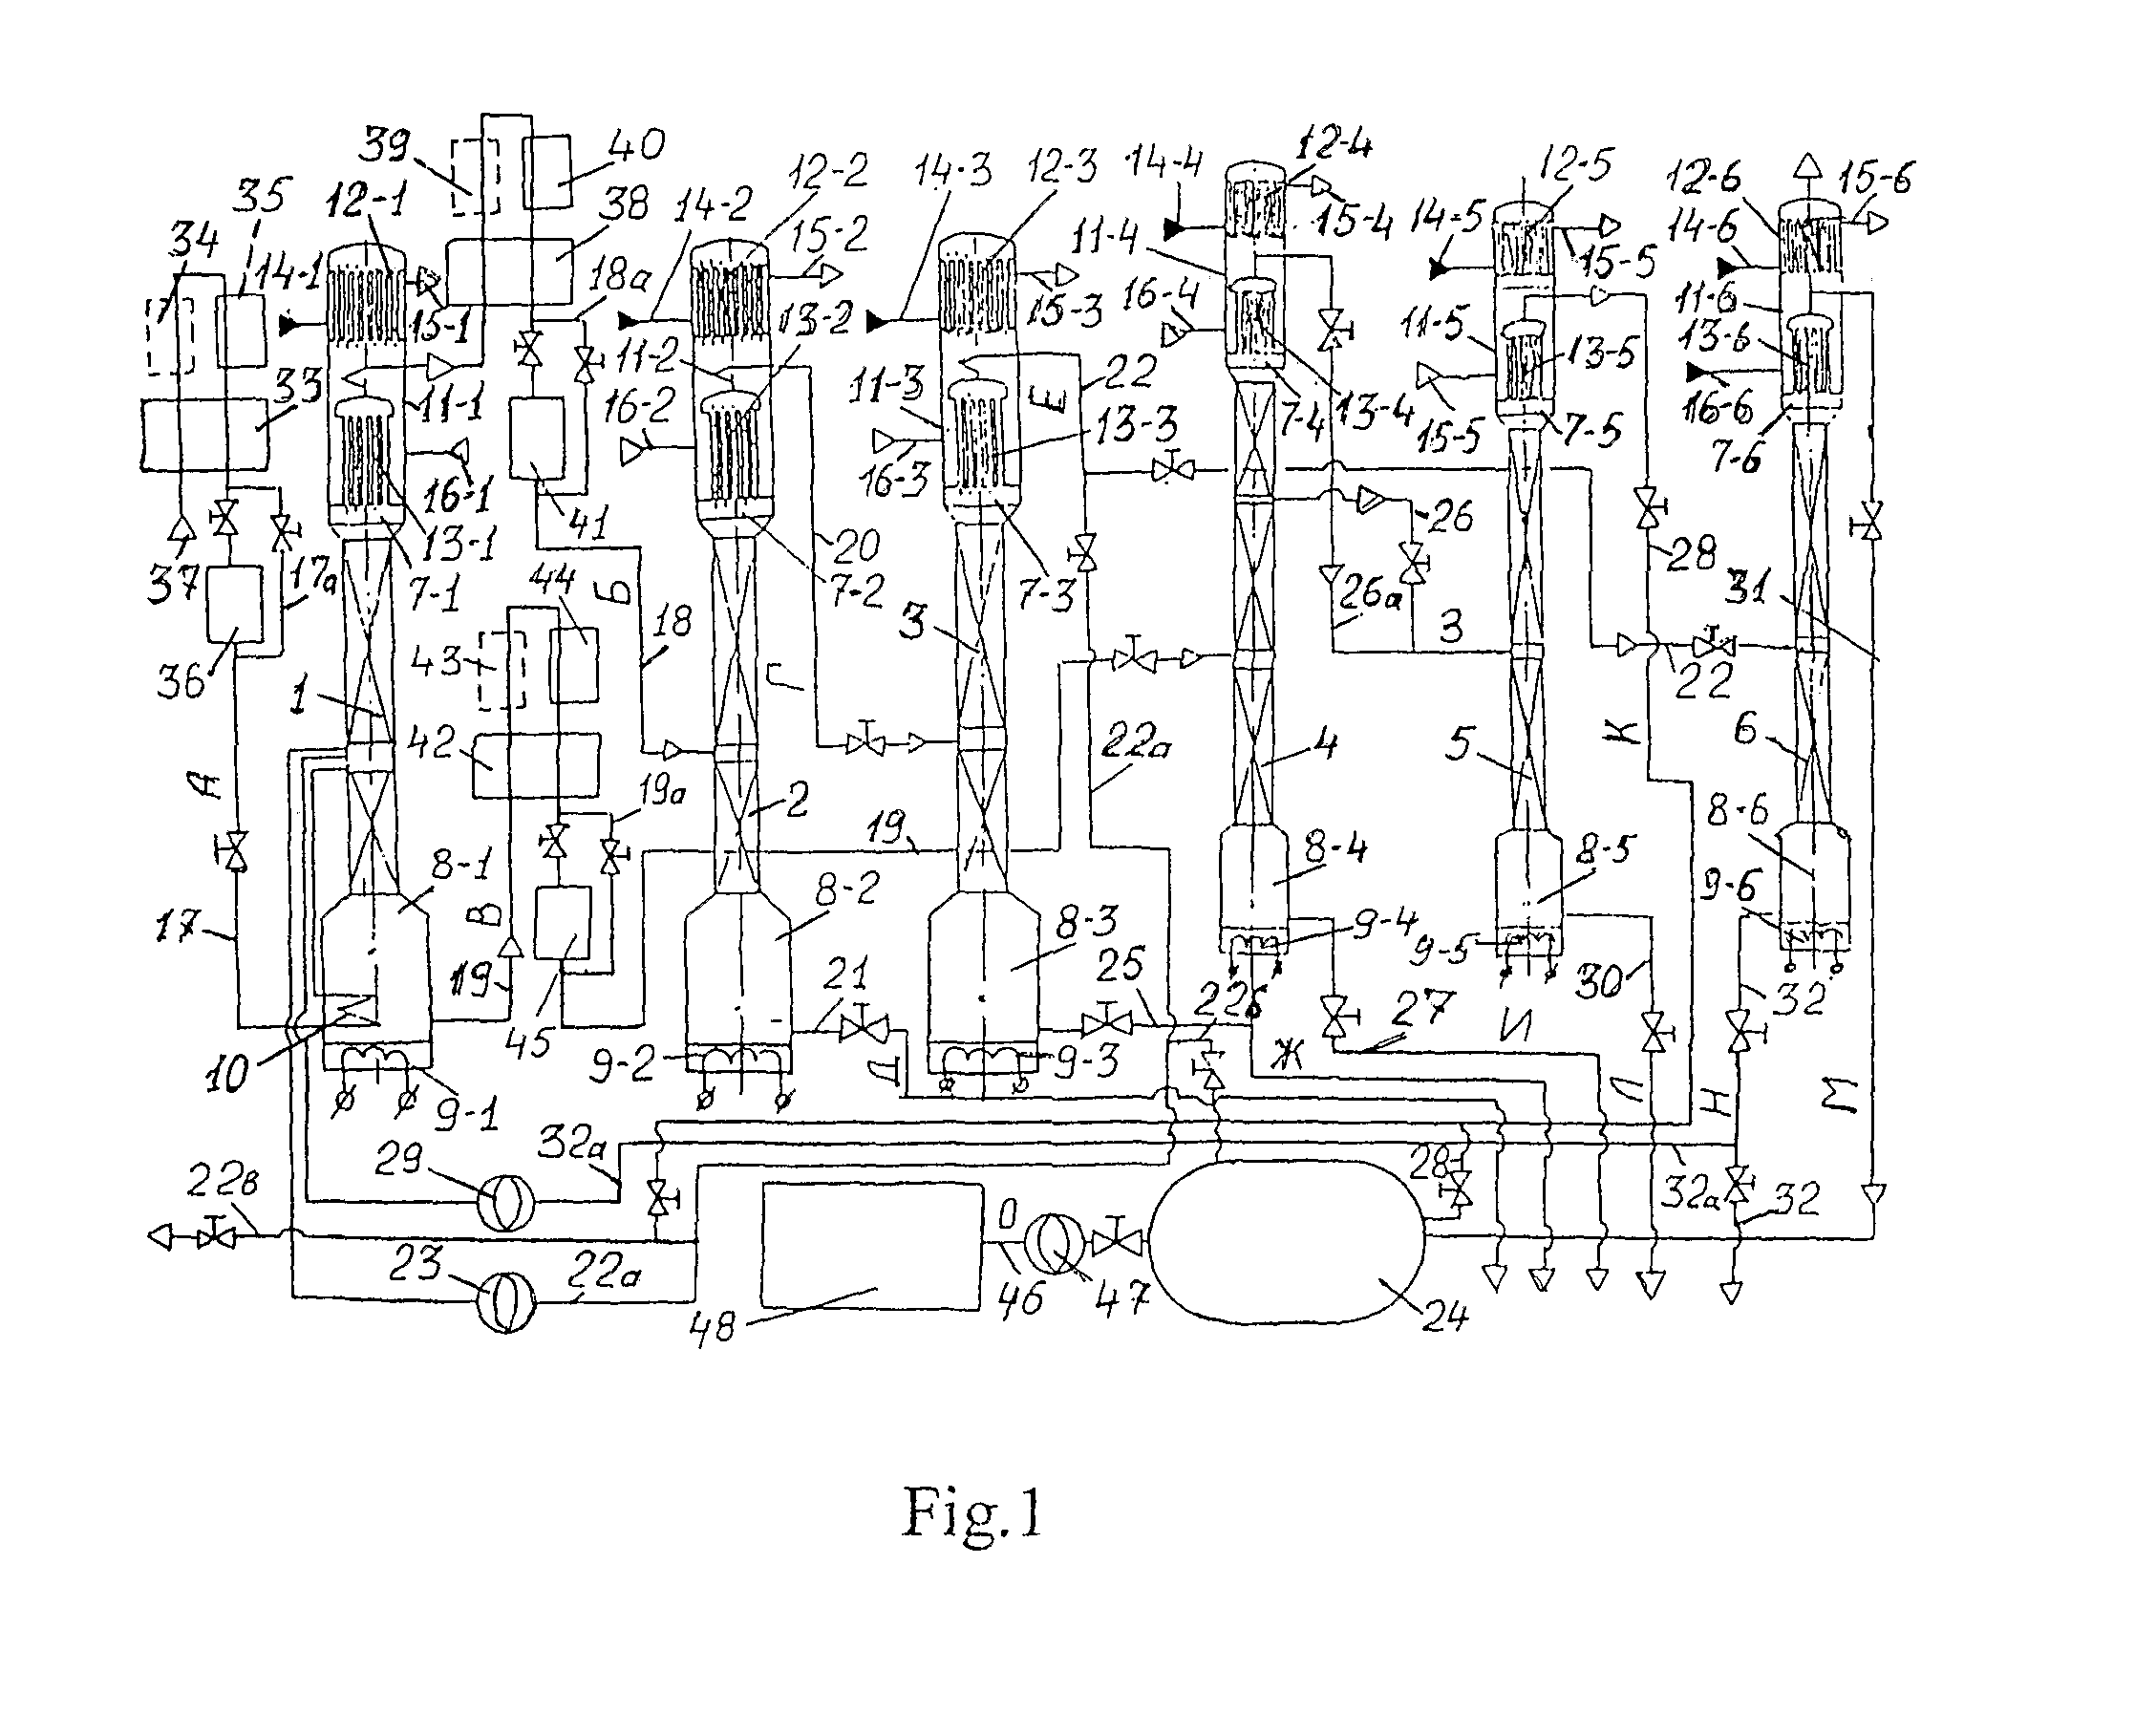 Method and apparatus for purifying and separating a heavy component concentrate along with obtaining light gas isotopes